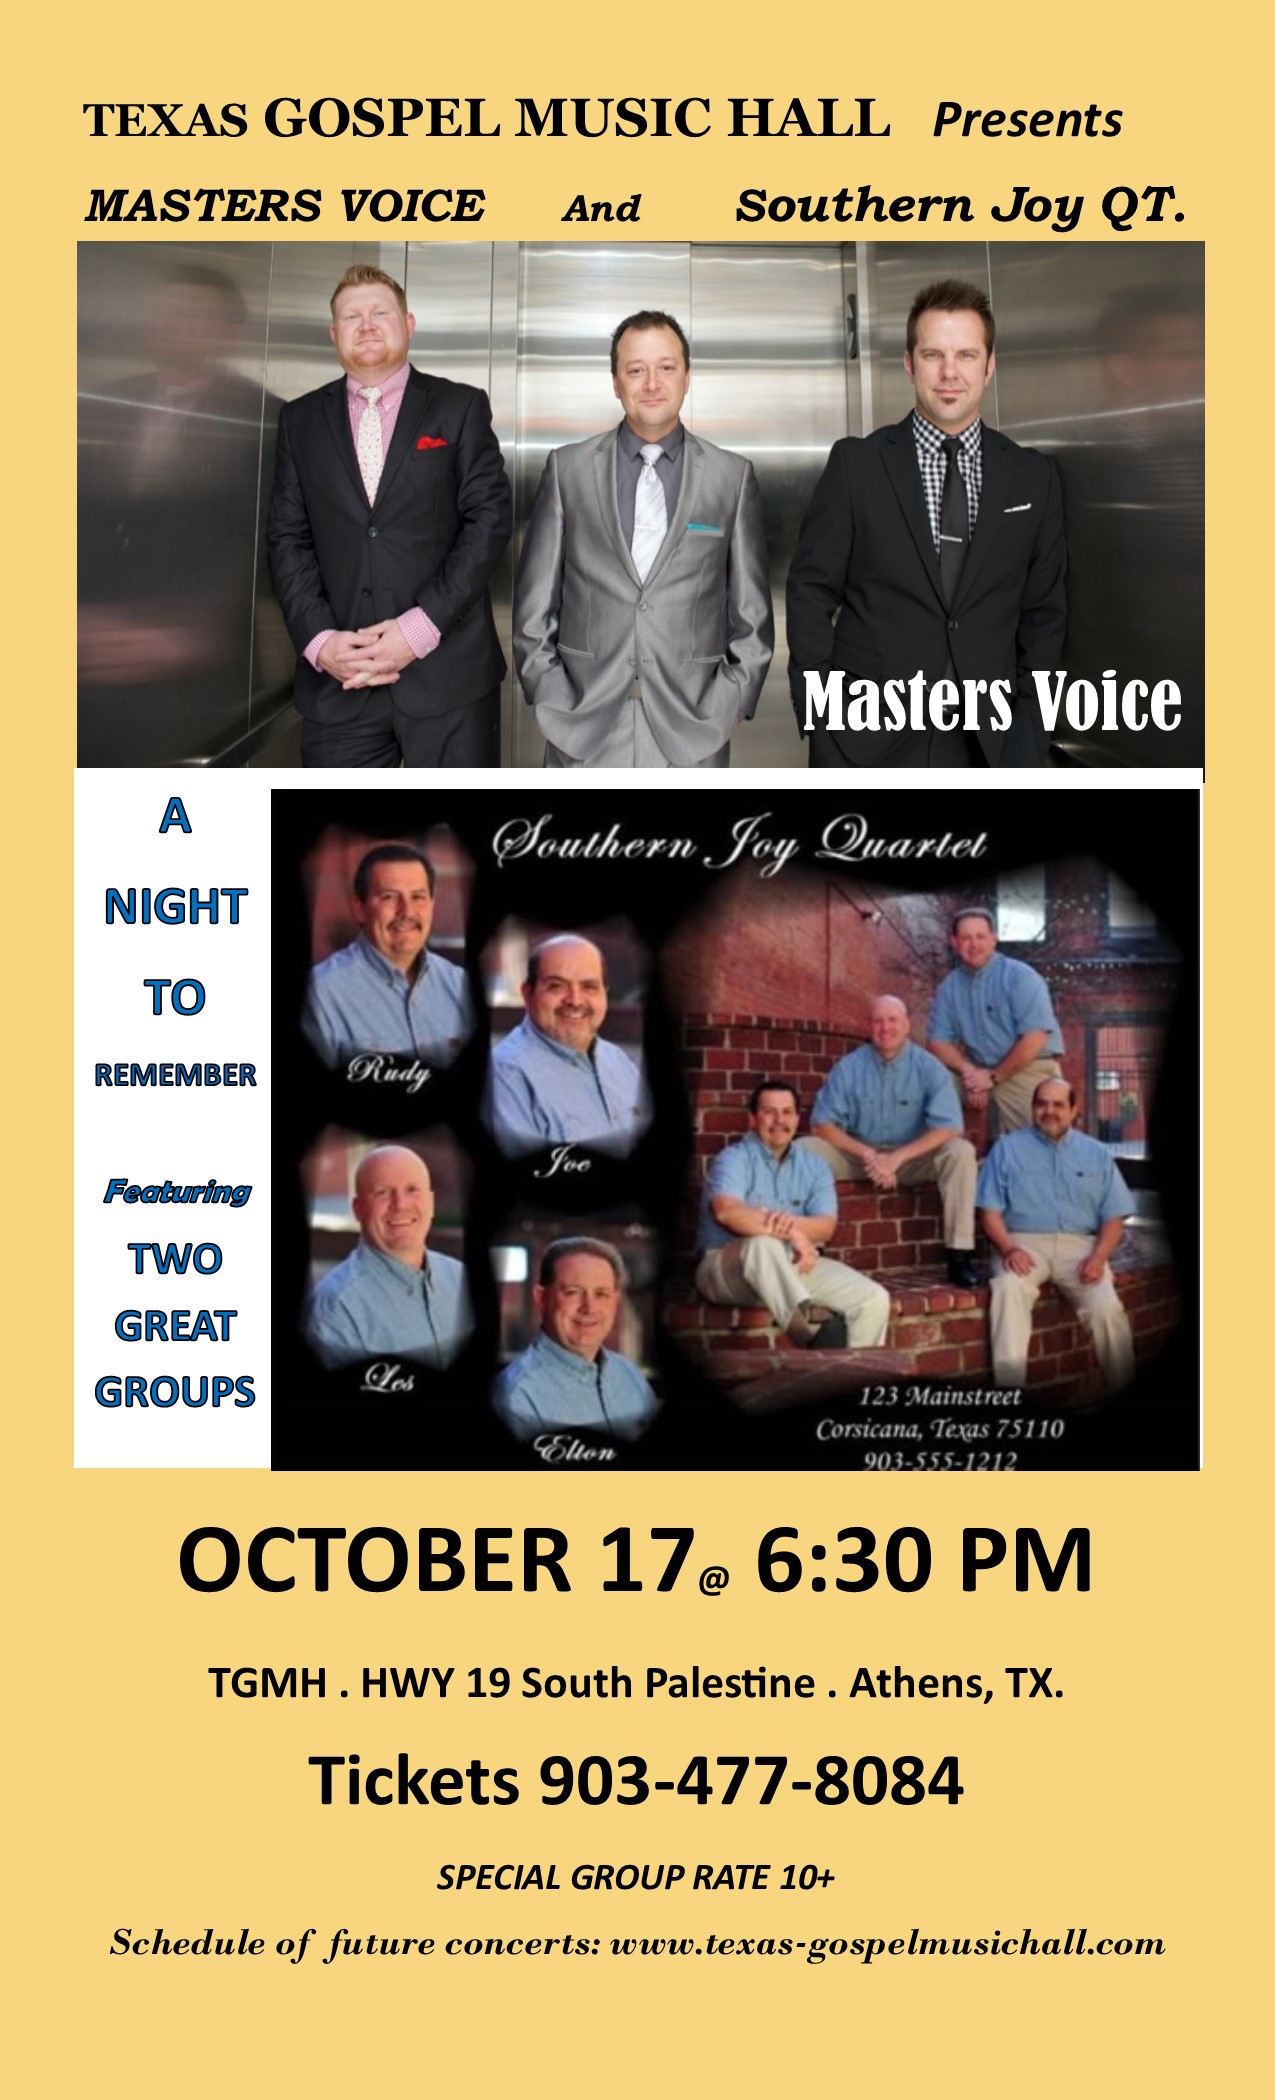 Texas Gospel Music Hall Presents MASTERS VOICE and SOUTHERN JOY QUARTET